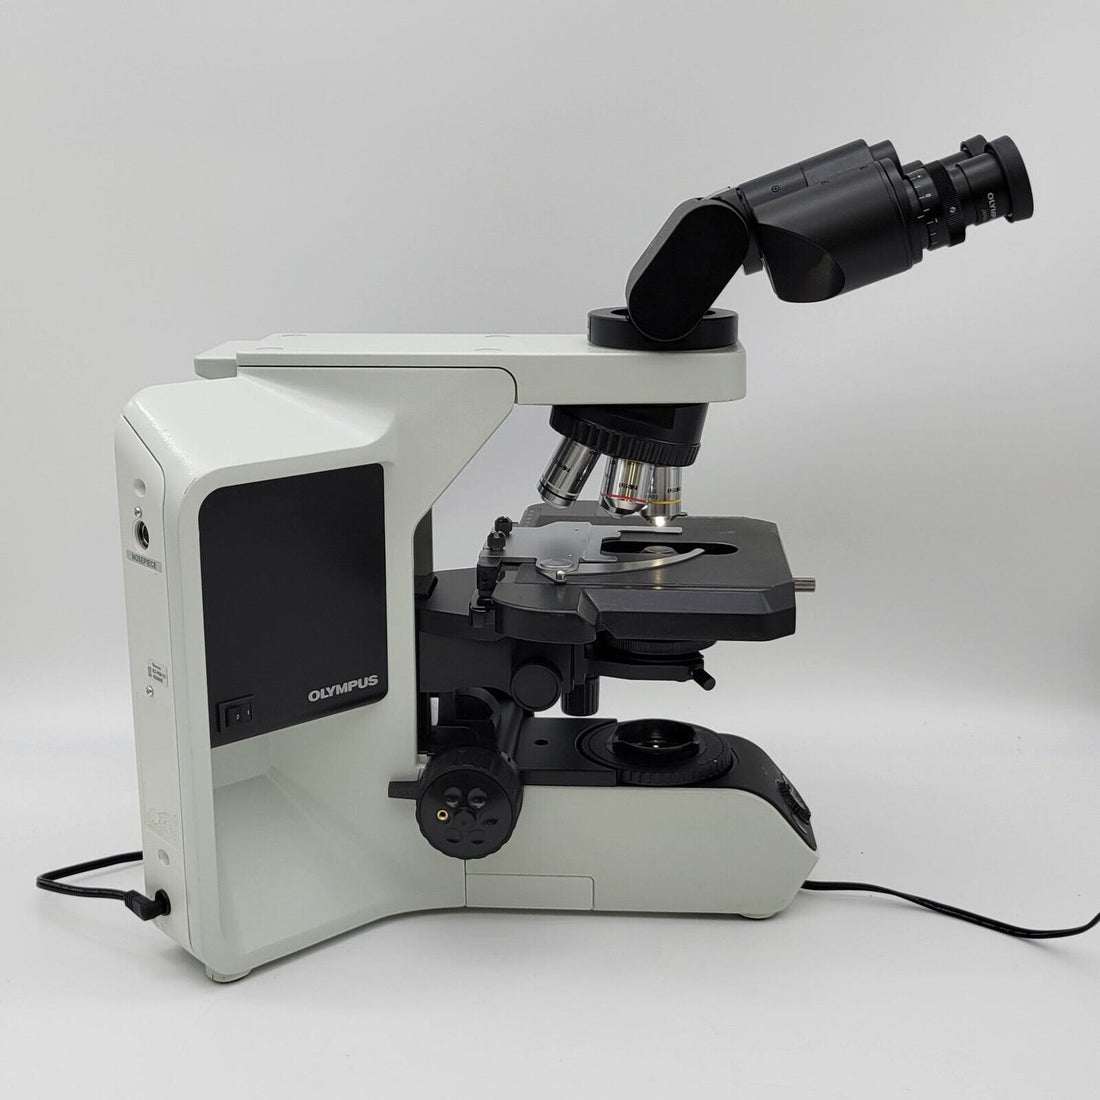 What is the most commonly used Pathology Microscope